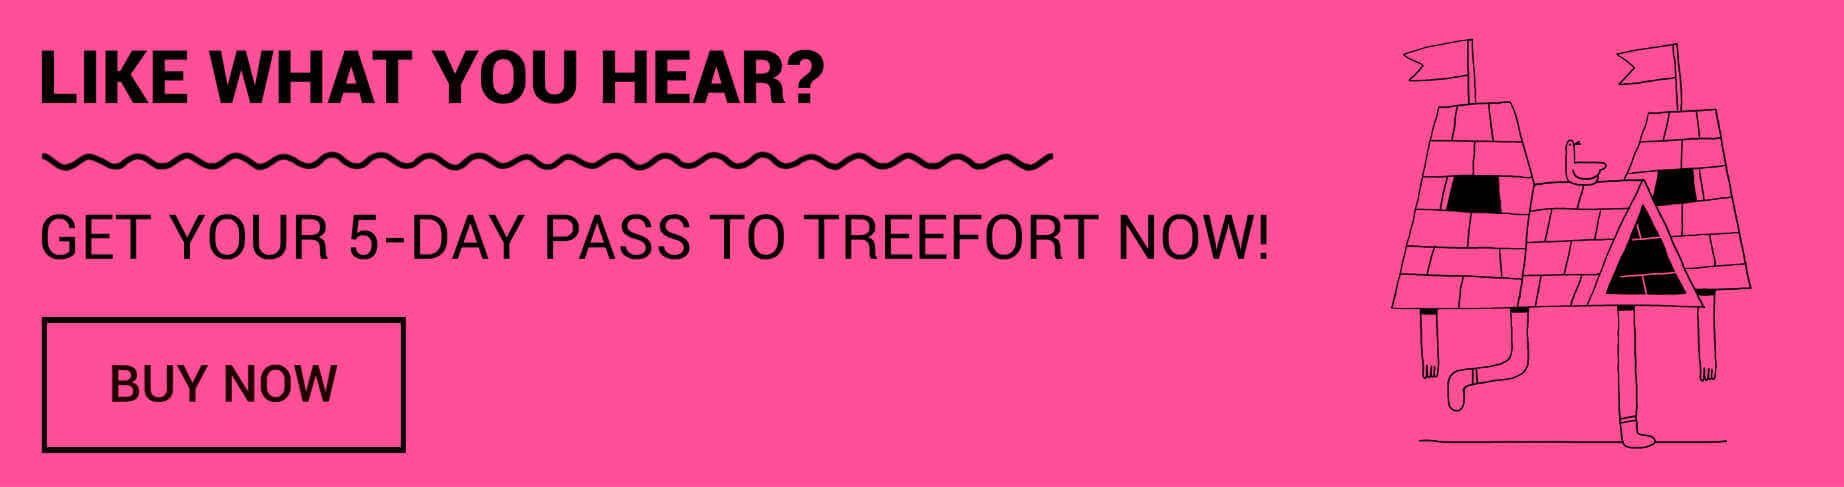 treefort 7 will be so much fun!